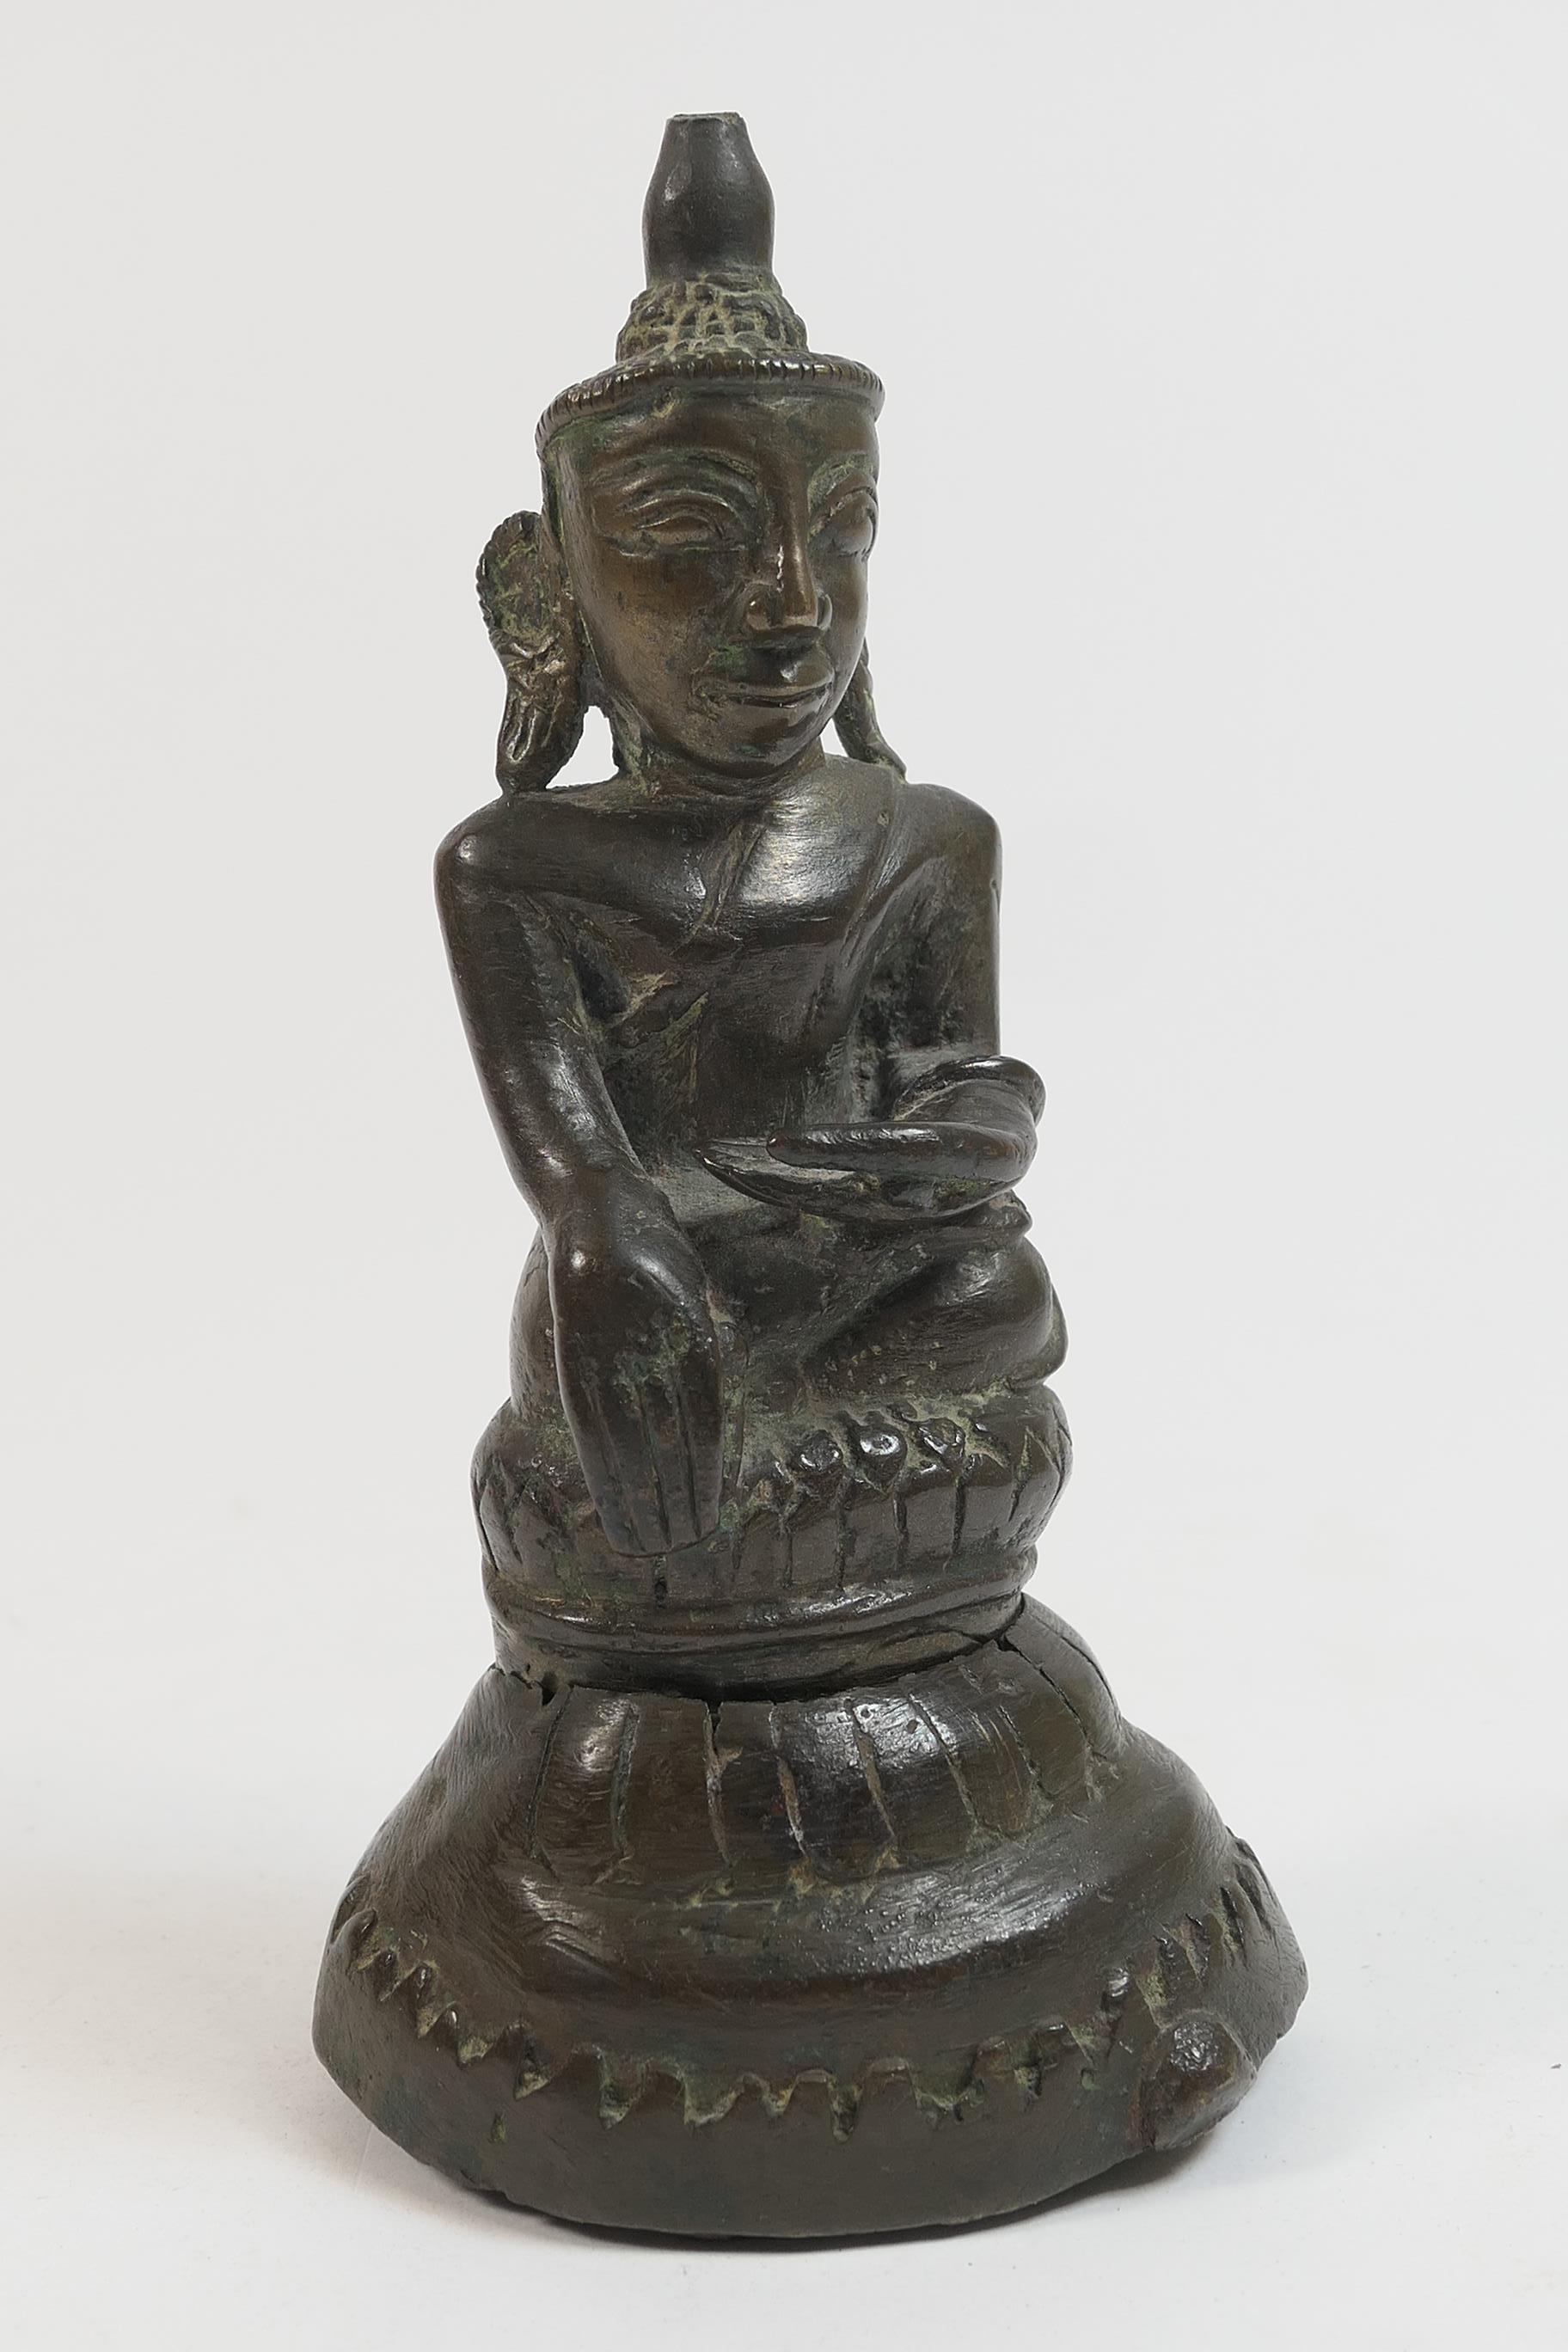 Antique bronze Buddha, possibly Cambodian (Khmer), 19th Century or earlier, seated in bhumisparsh